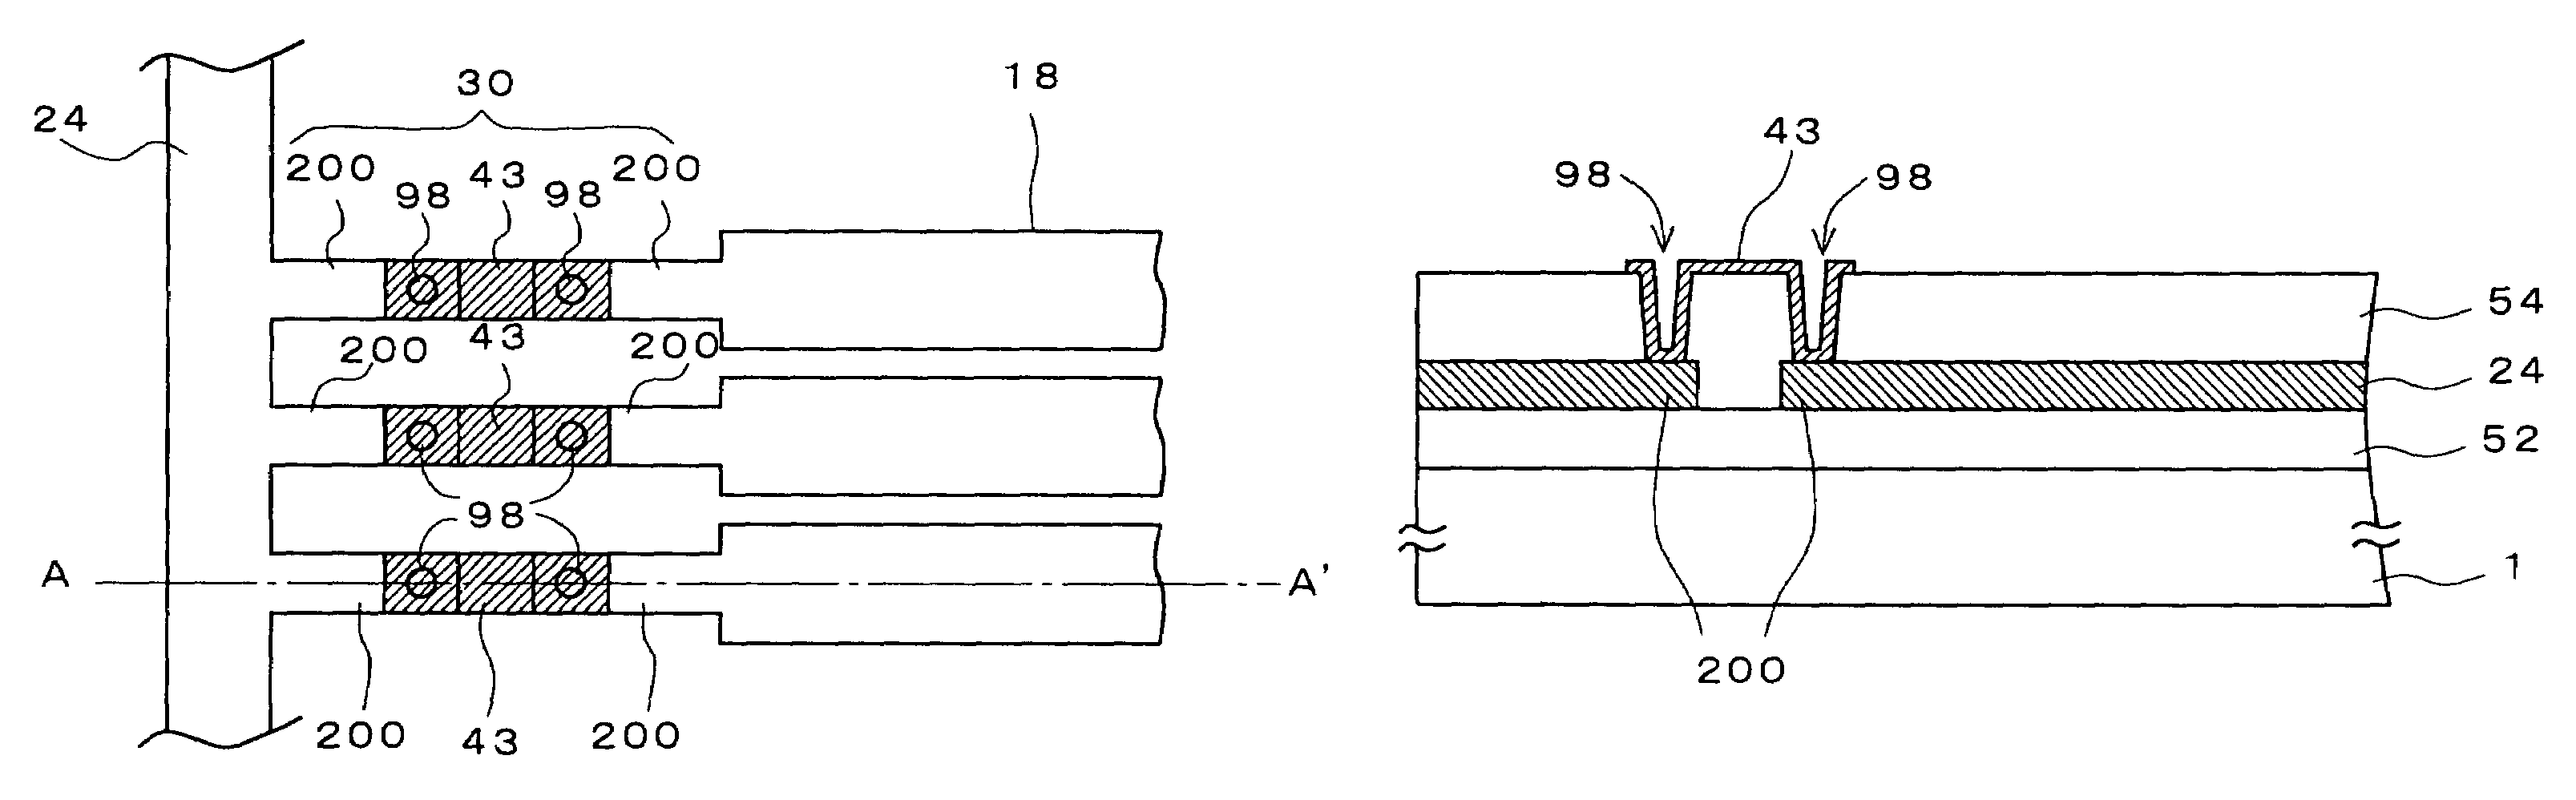 Liquid crystal display comprising an electrostatic protection element formed between adjacent bus lines